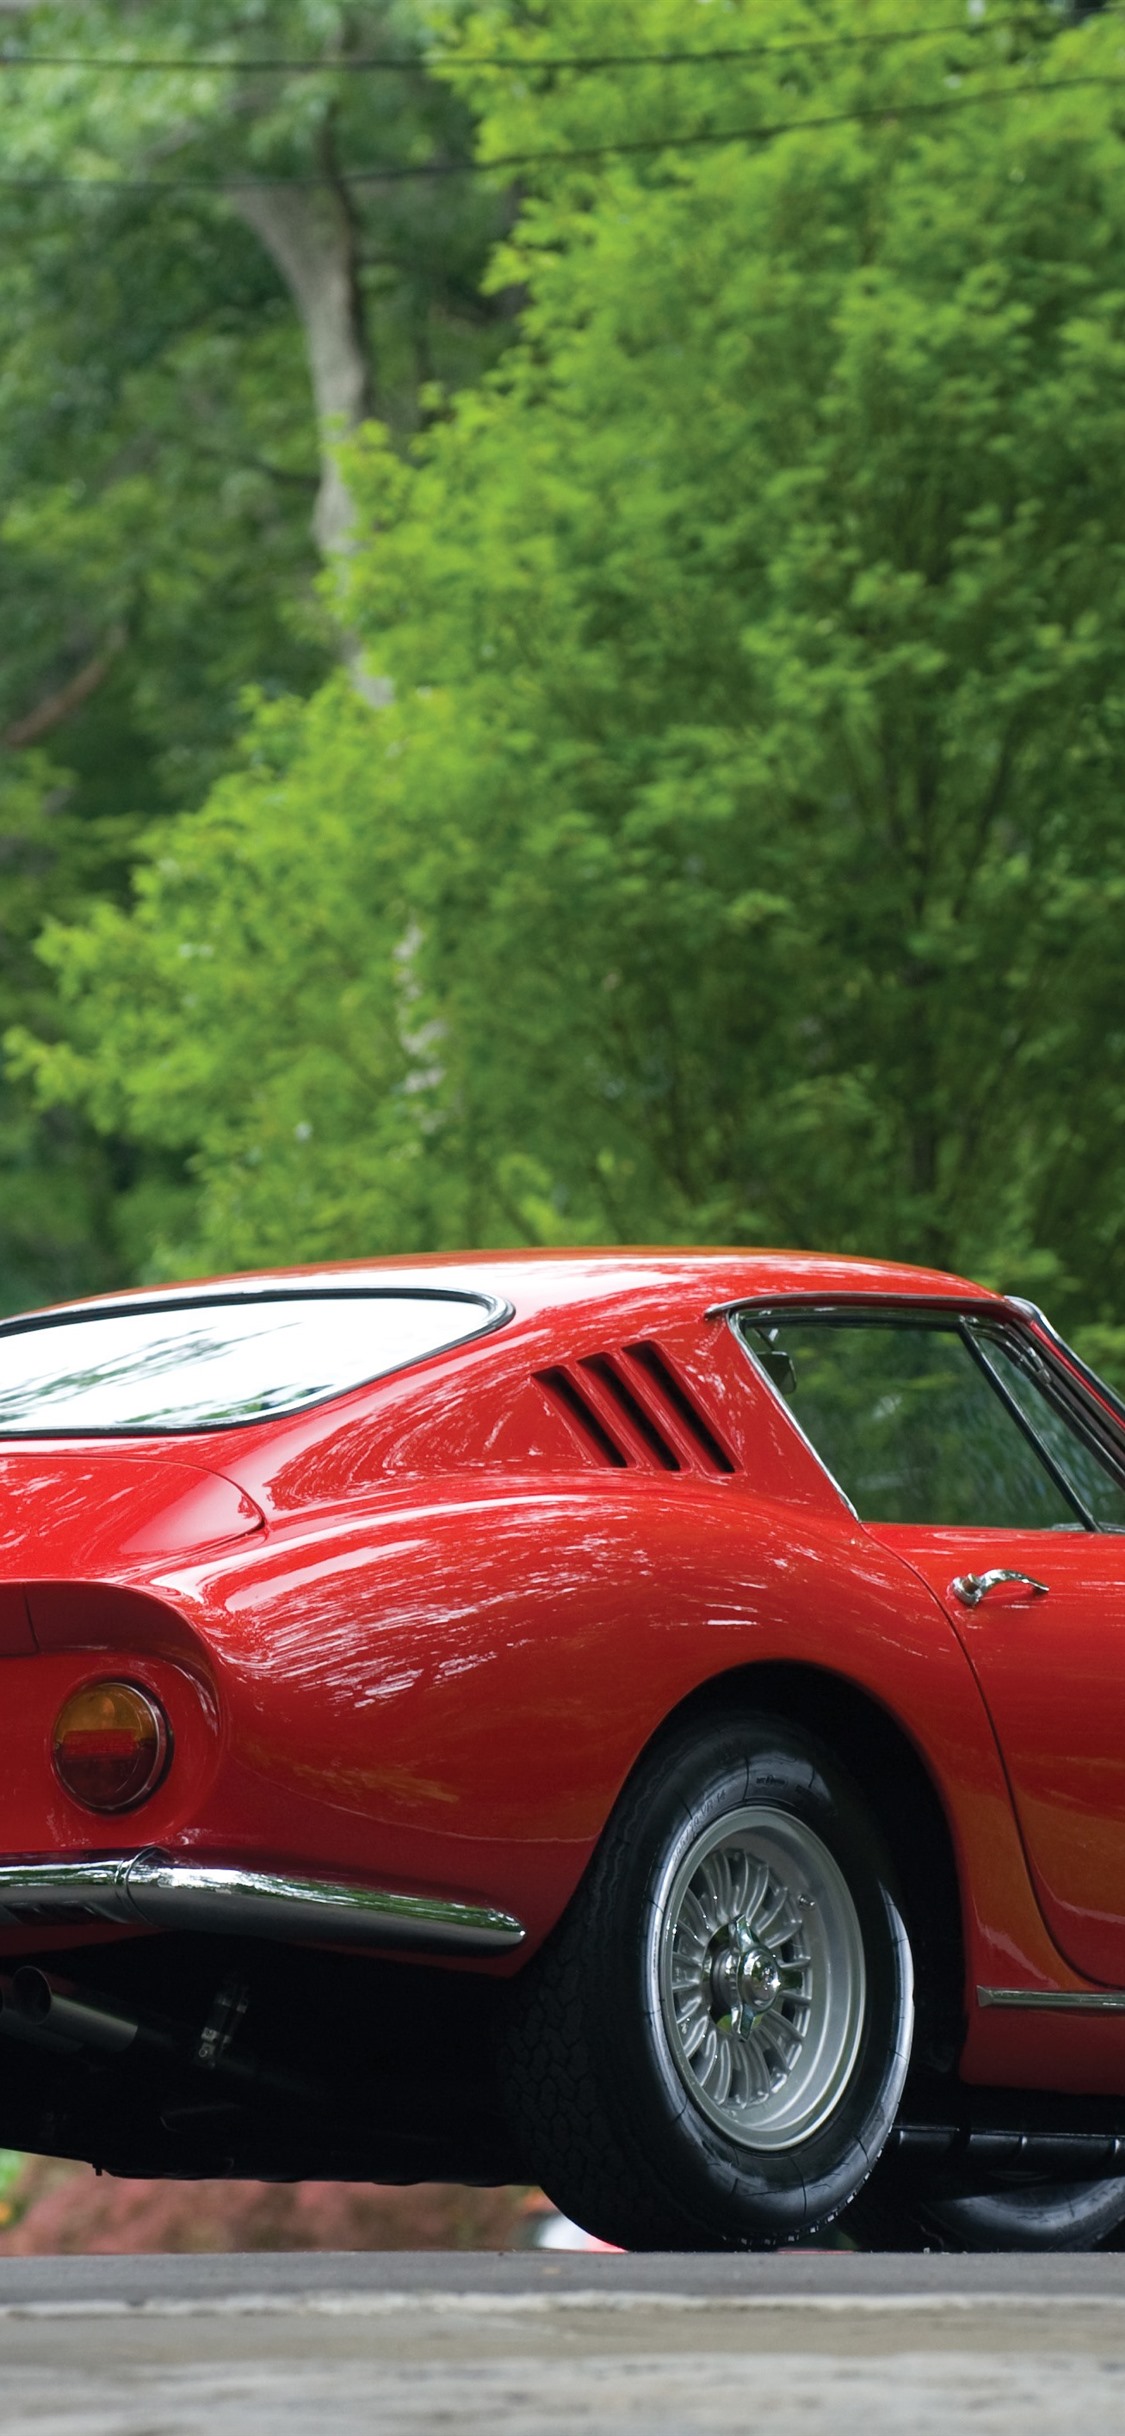 Ferrari Red Classic Car Rear View, Green Trees 1242x2688 IPhone 11 Pro XS Max Wallpaper, Background, Picture, Image